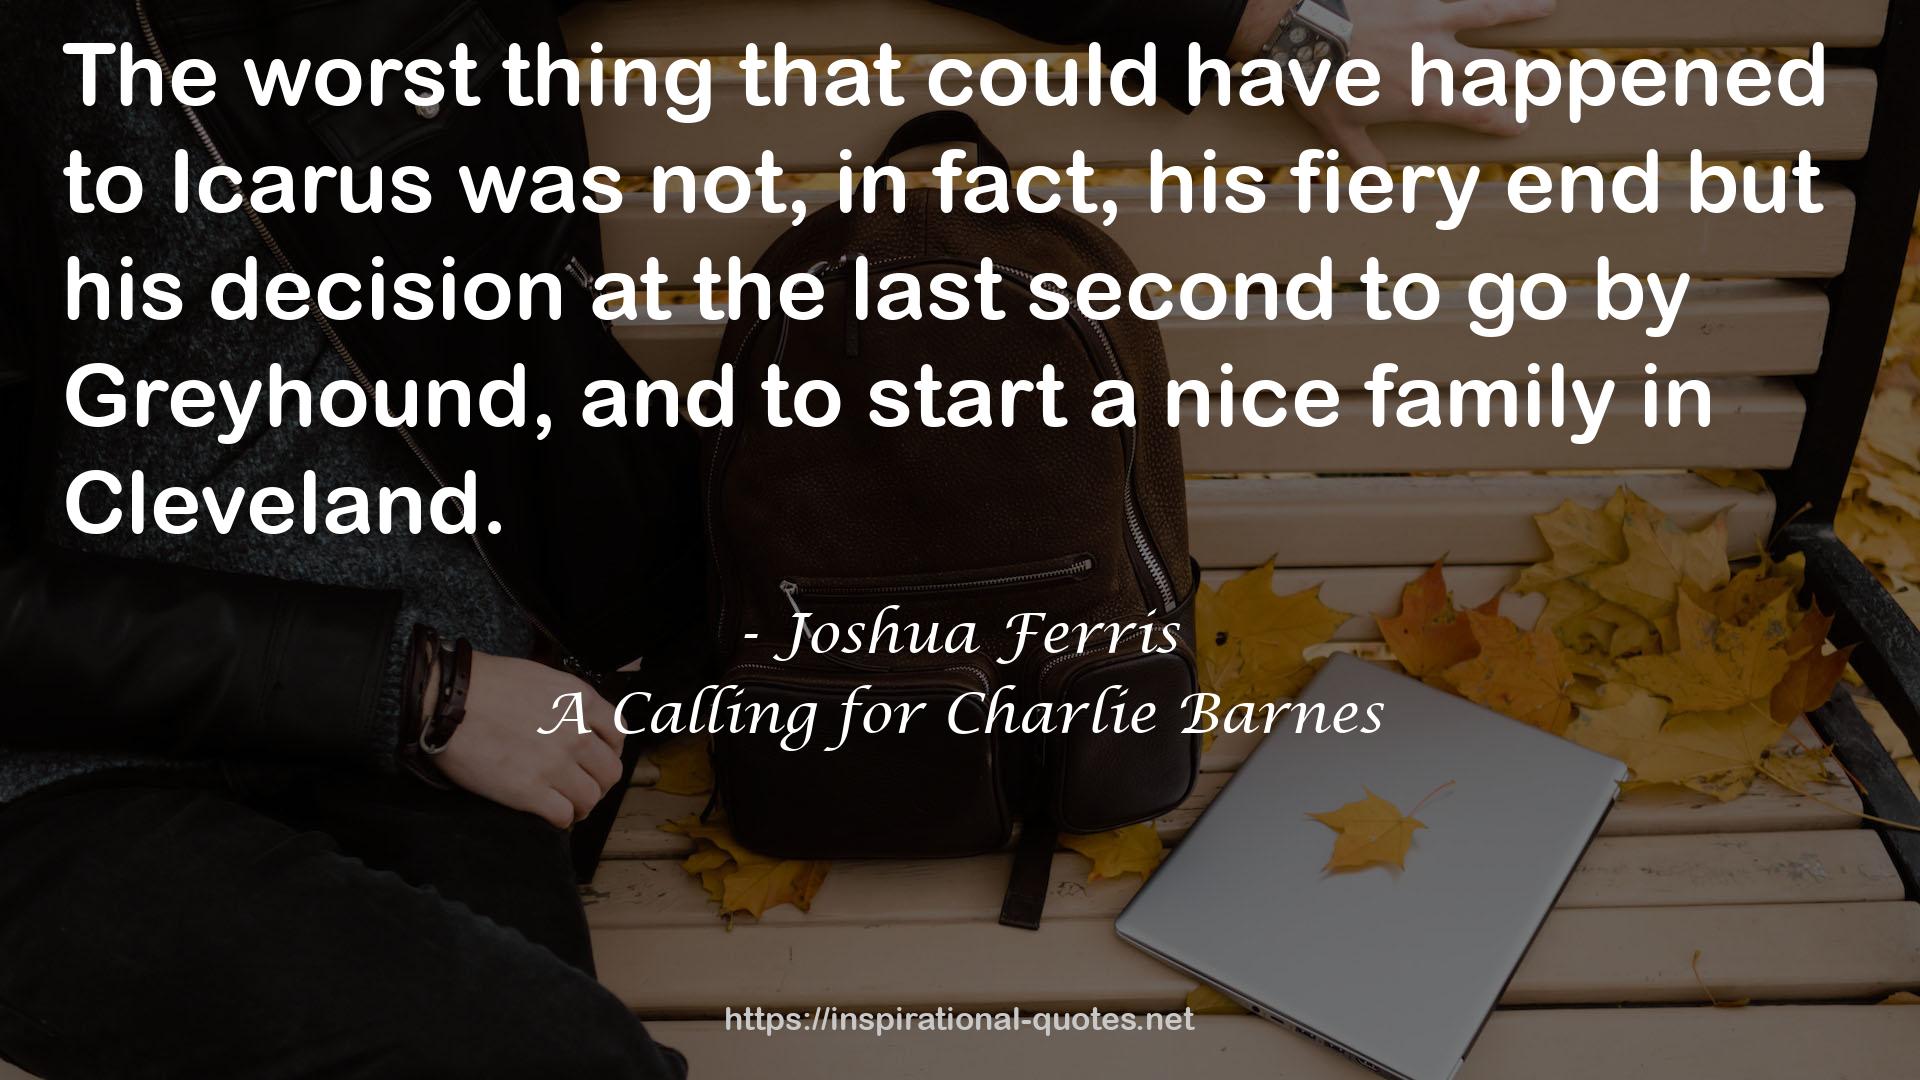 A Calling for Charlie Barnes QUOTES